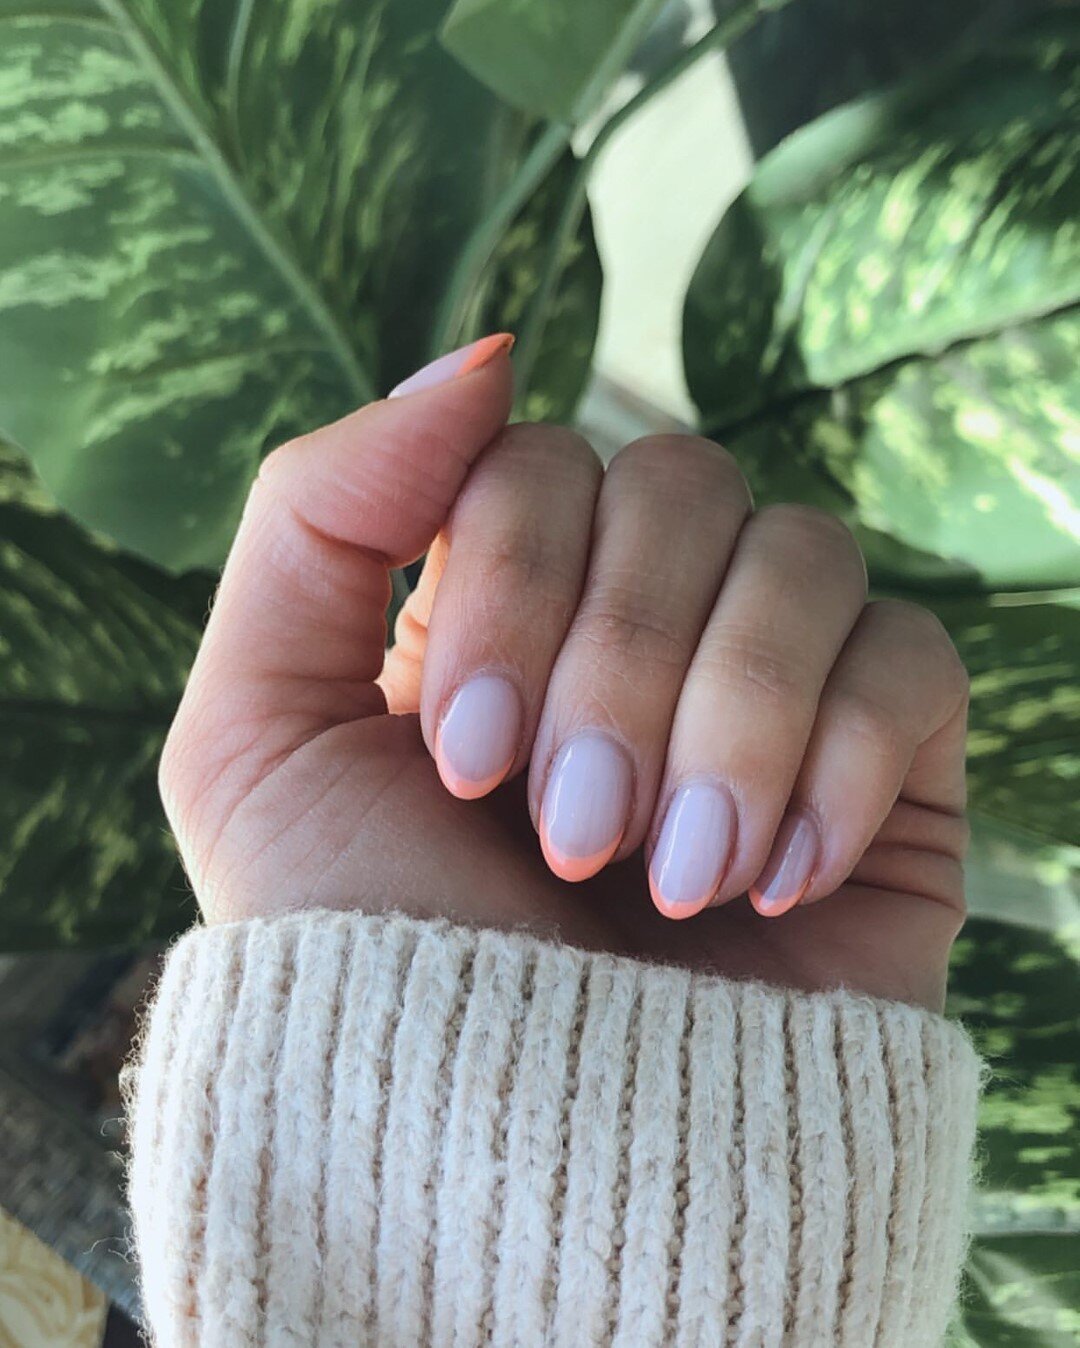 good nails complete the outfit⠀⠀⠀⠀⠀⠀⠀⠀⠀
*⠀⠀⠀⠀⠀⠀⠀⠀⠀
*⠀⠀⠀⠀⠀⠀⠀⠀⠀
//@lizlems⠀⠀⠀⠀⠀⠀⠀⠀⠀
#fall #autumn #tips #neonnails #shellac #manicure #pedicure #nailsofinstagram #nails #nailsoftheday #verygoodnail #nailsonfleek #nailart #trendynails #kukohouse #nailfe